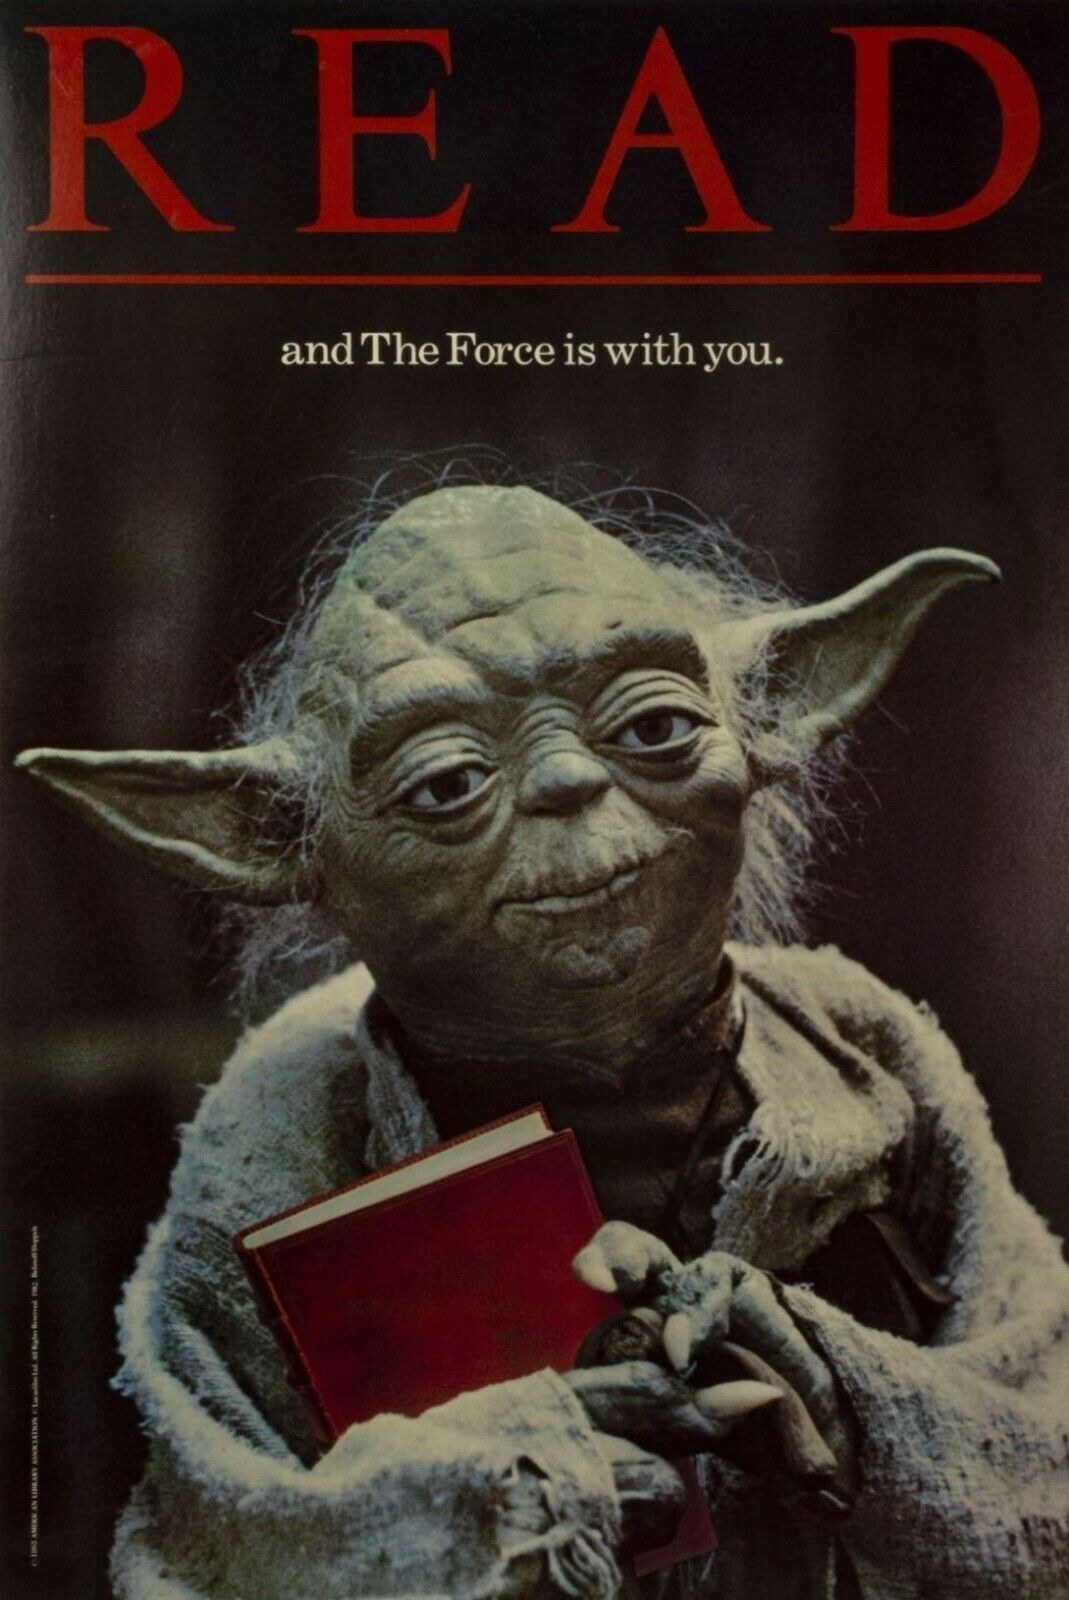 Yoda on a &quot;Read&quot; poster